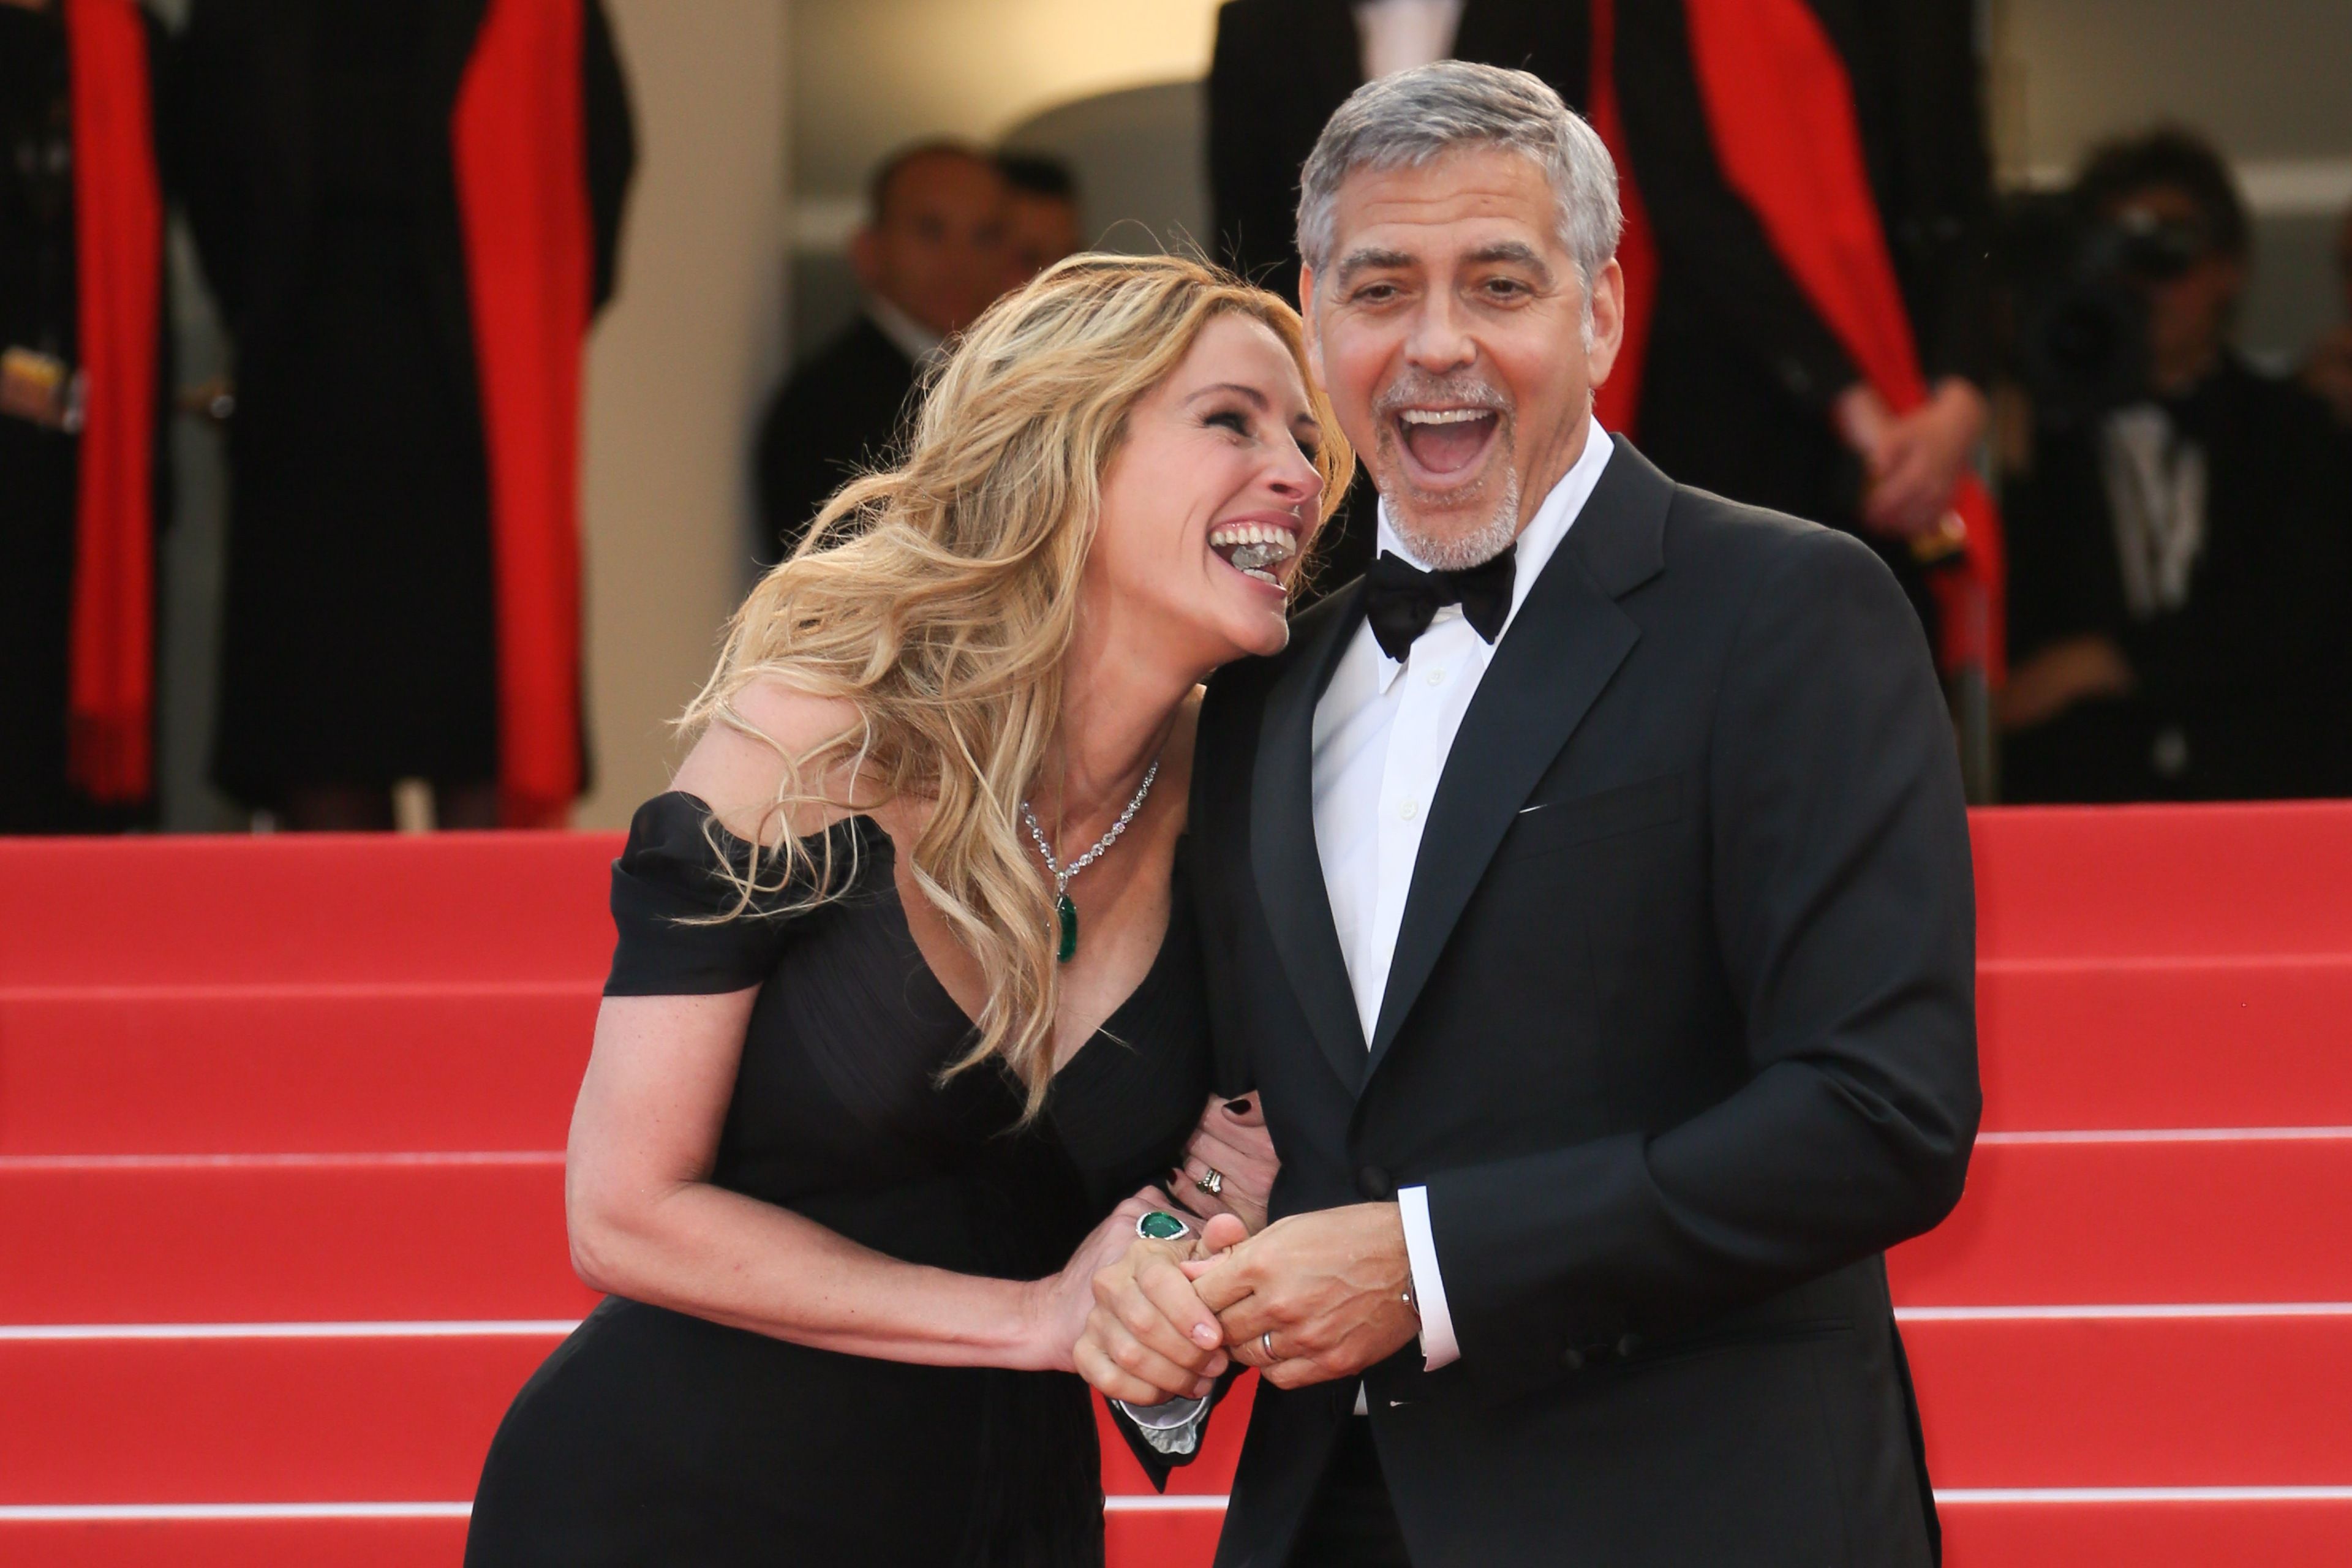 George Clooney? Julia Roberts? A Rom-com? 'Ticket to Paradise' Isn